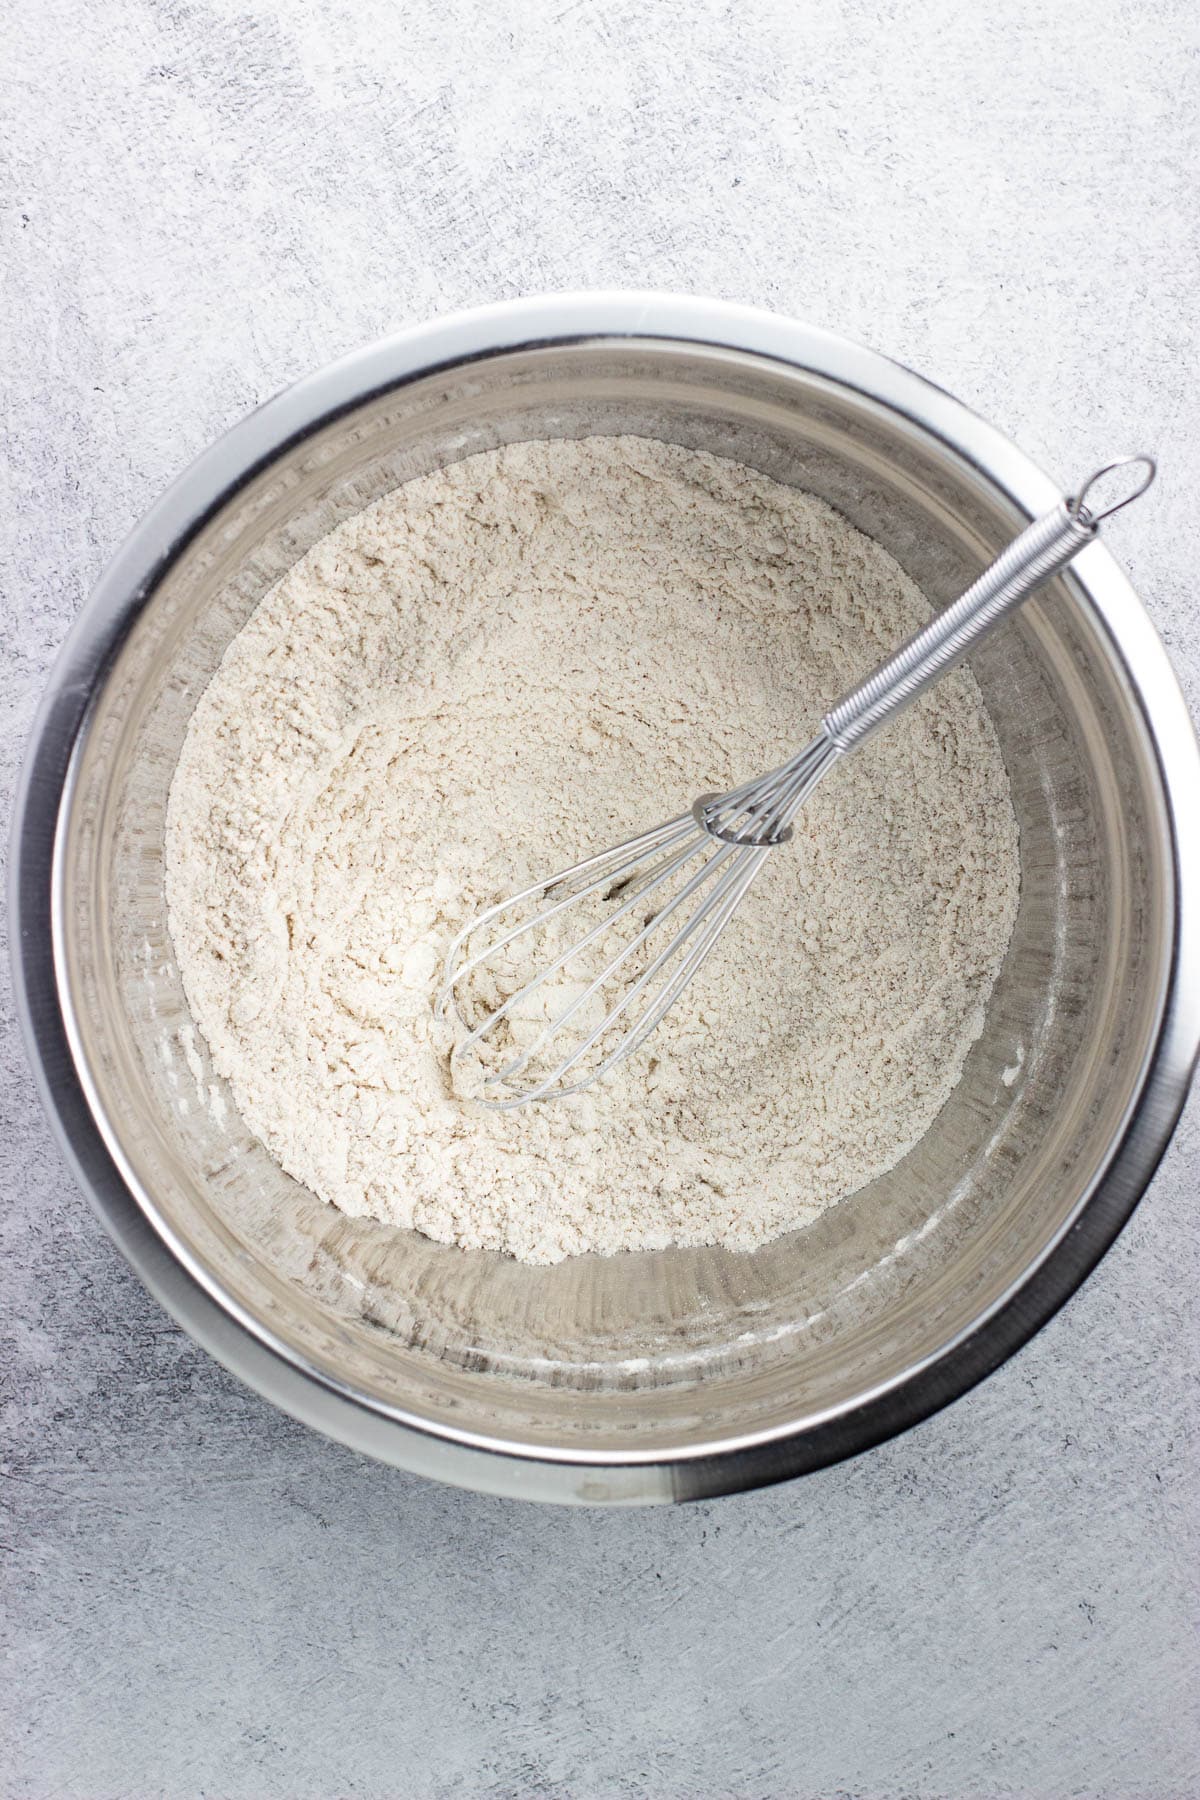 Dry ingredients whisked together in a bowl.